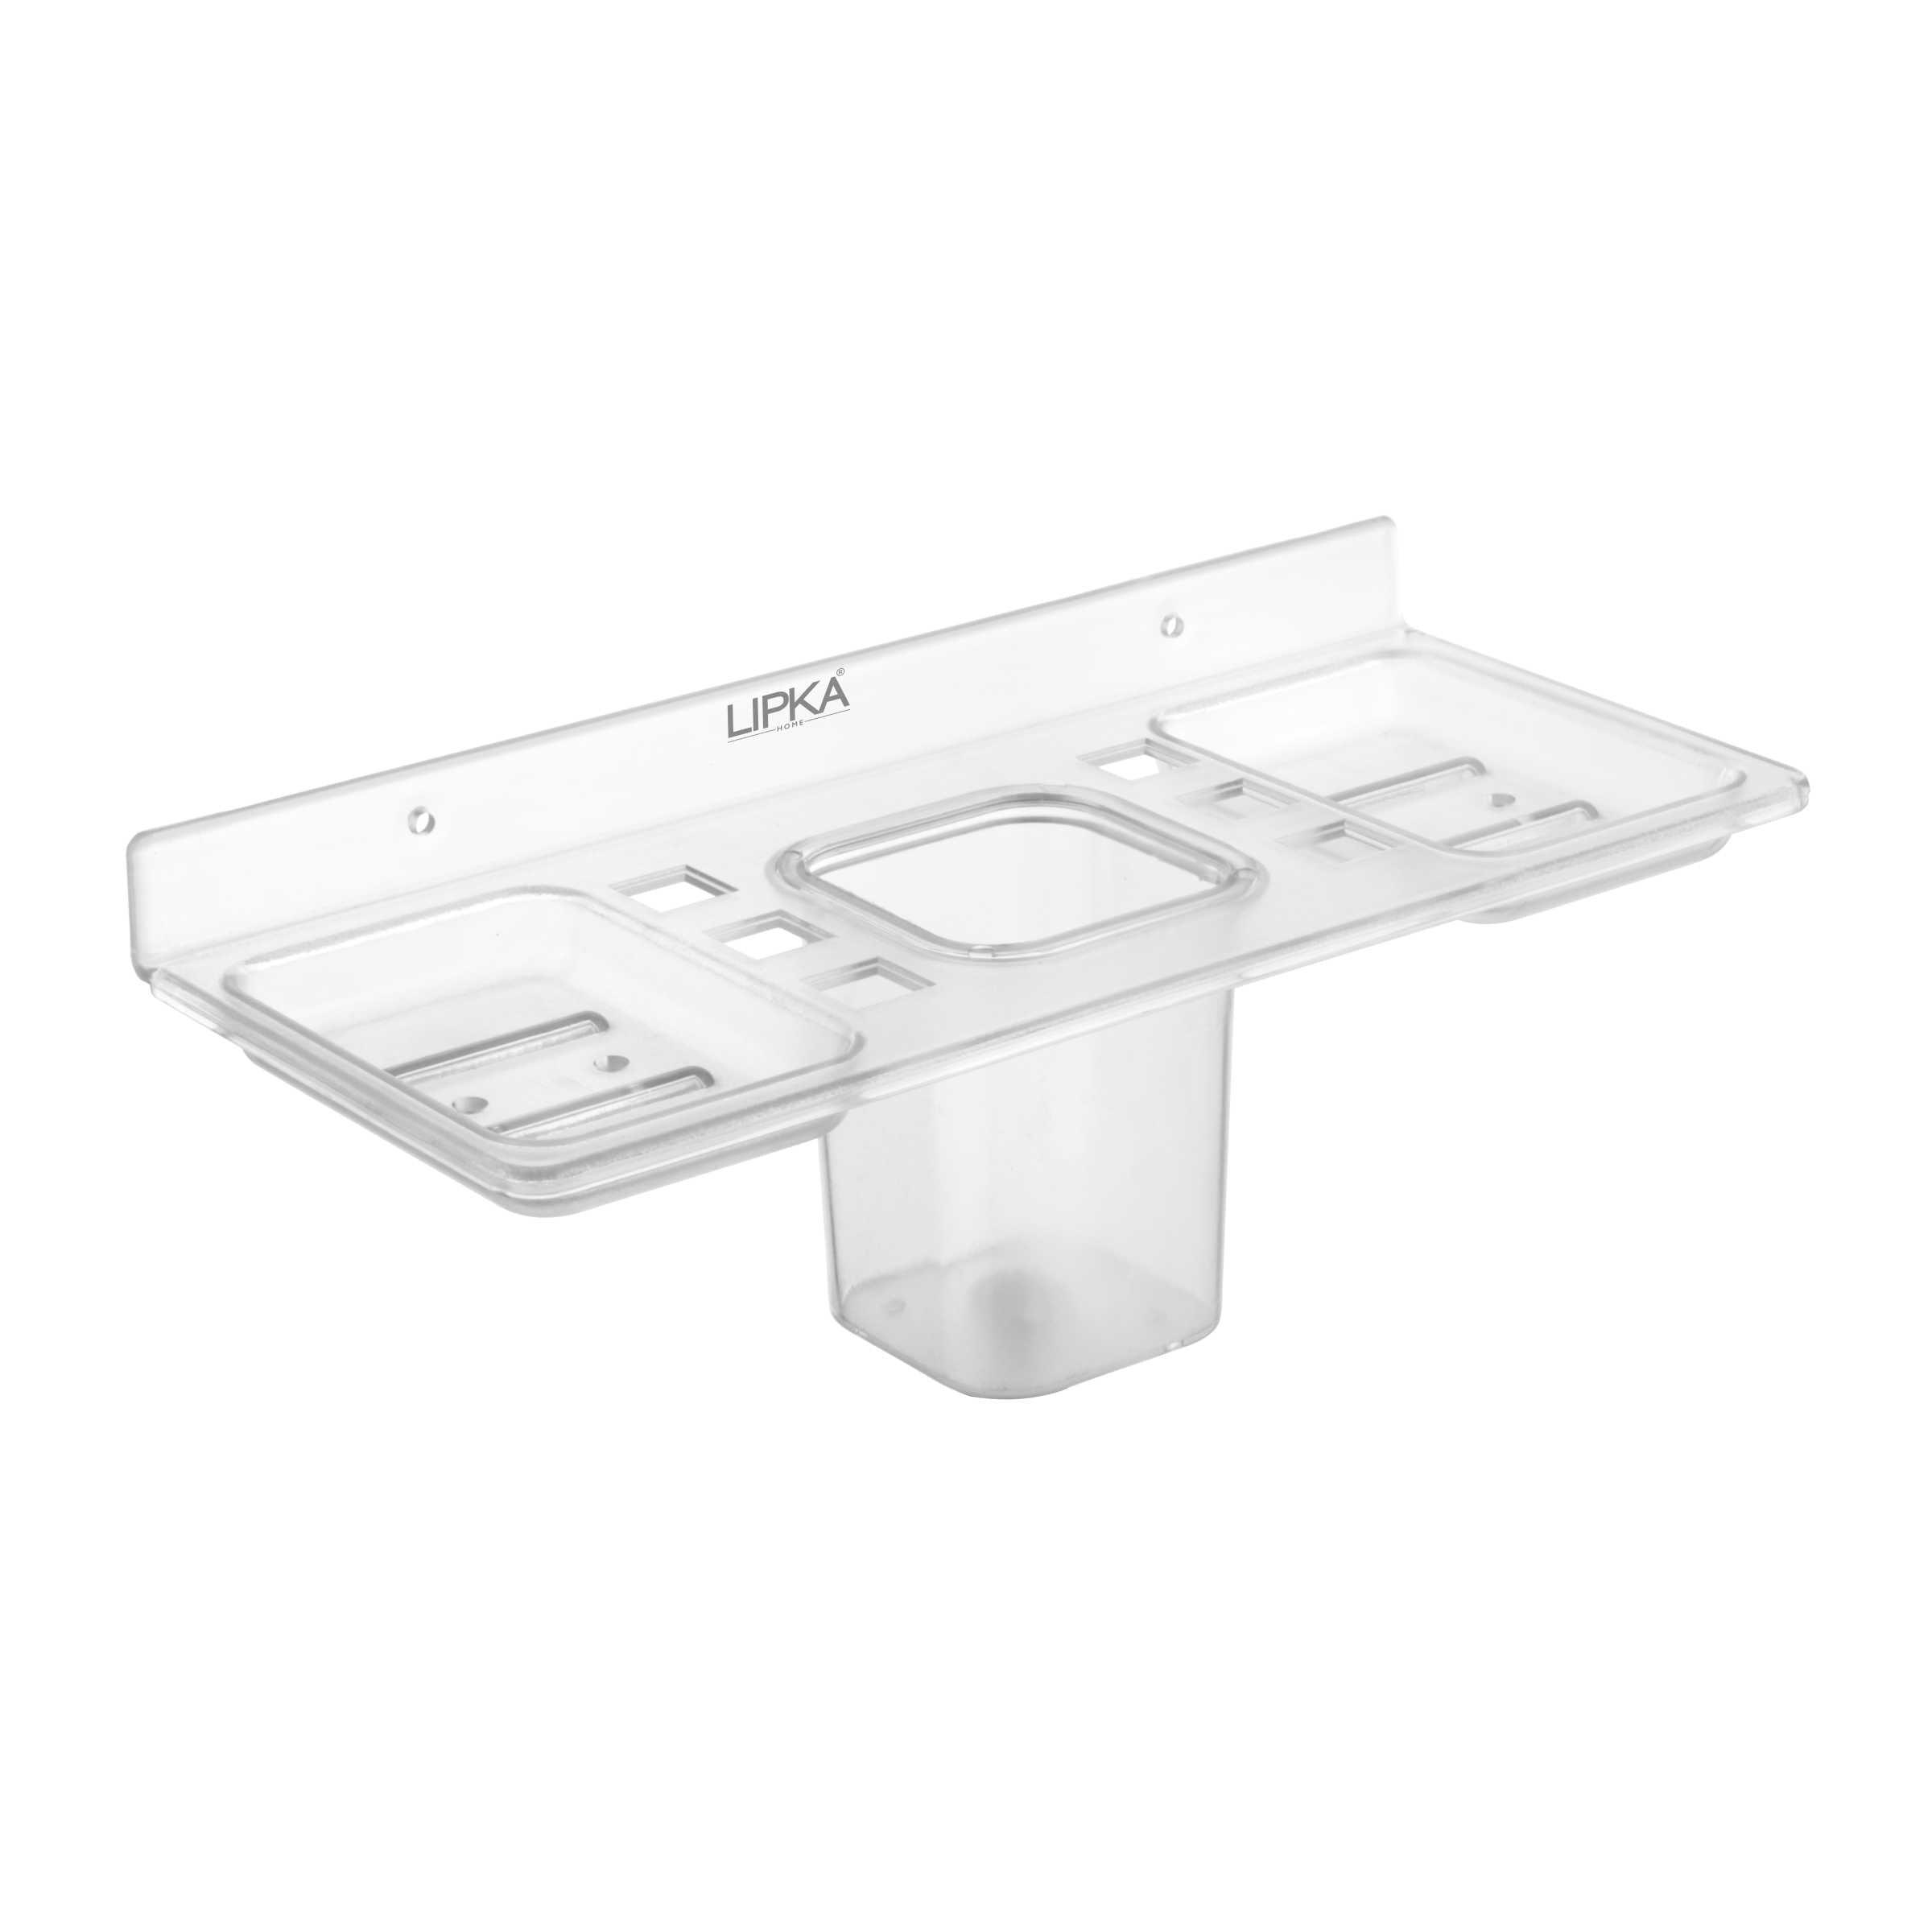 4-in-1 Shelf Tray (Tumbler, Toothbrush Holder & 2 Soap Dishes )